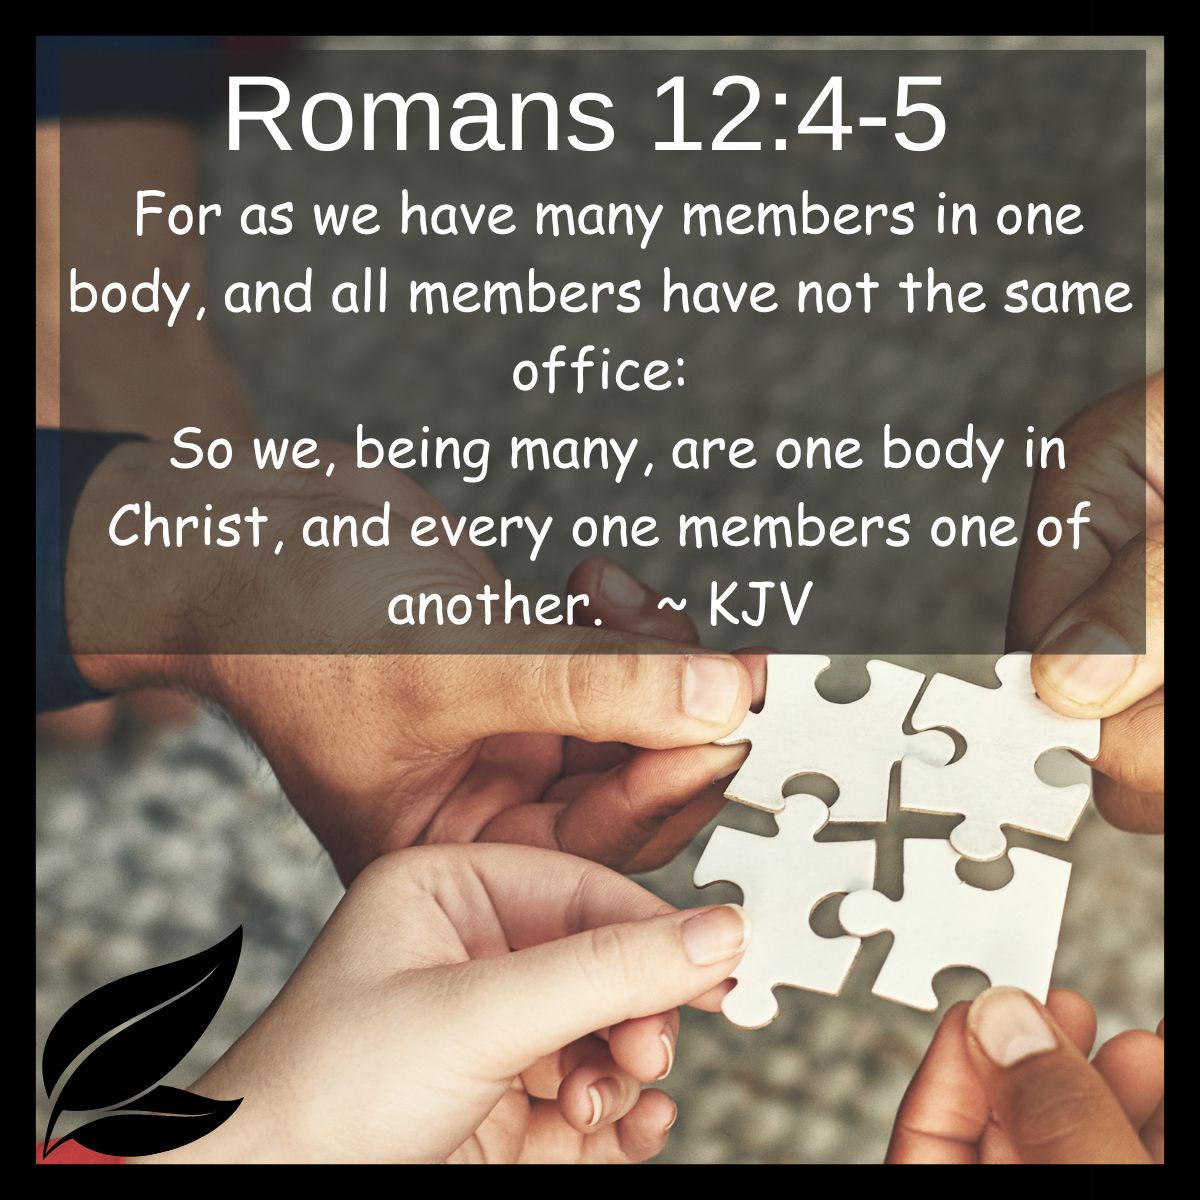 For as we have many members in one body, and all members have not the same office: so we, being many, are one body in Christ, and every one members one of another. Romans 12: 4-5